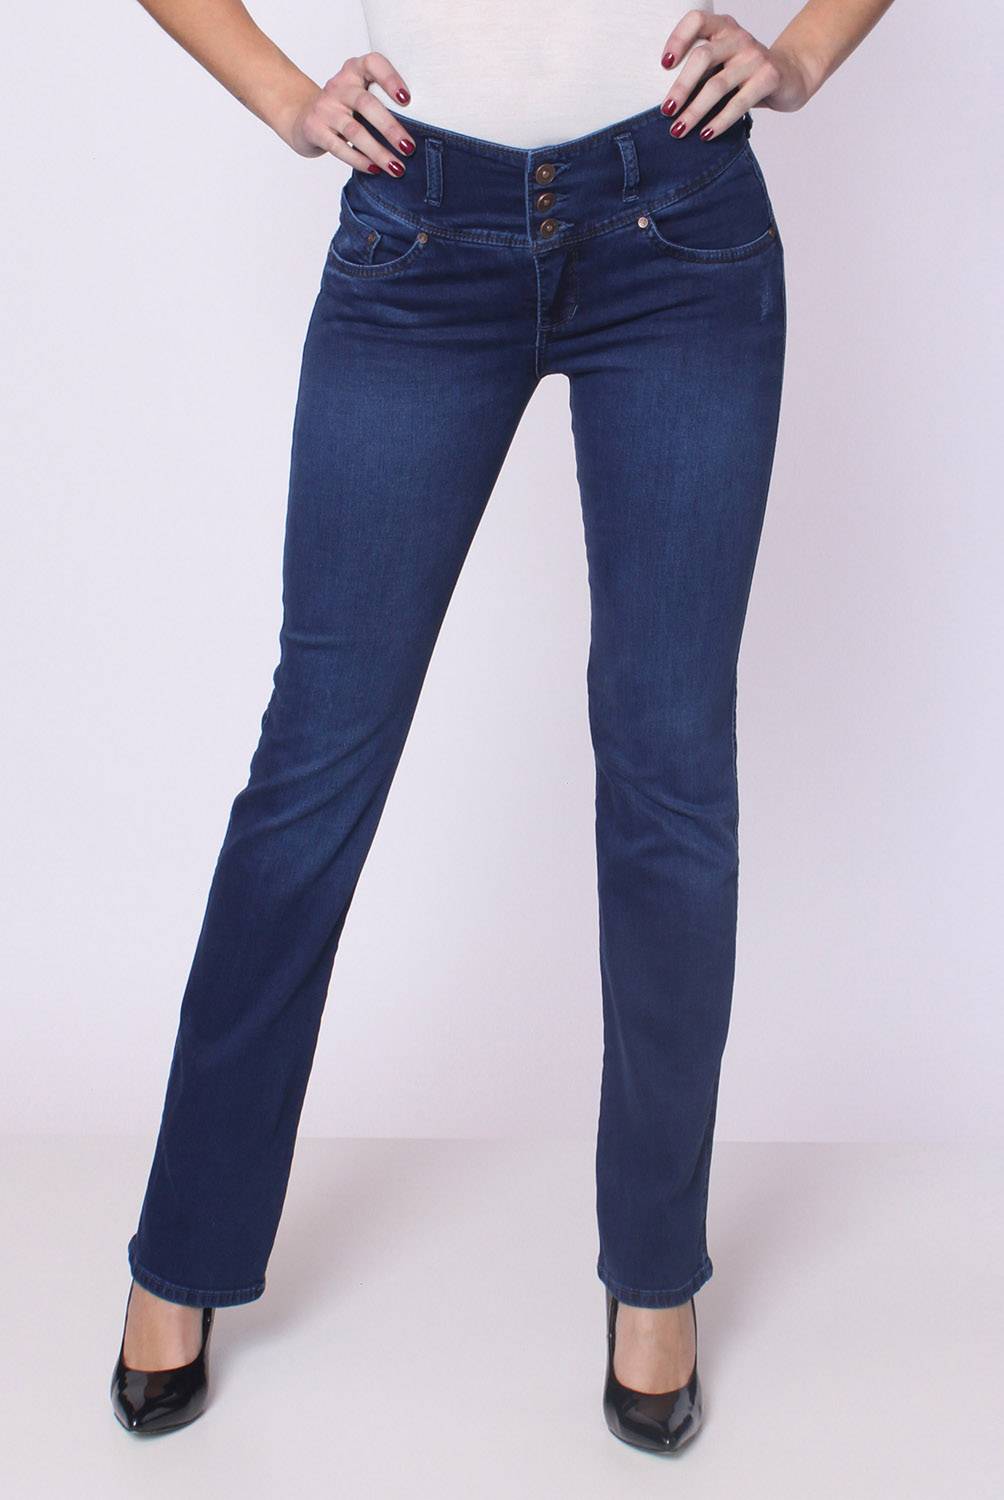  - JEANS WADOS 236945 AZUL 38